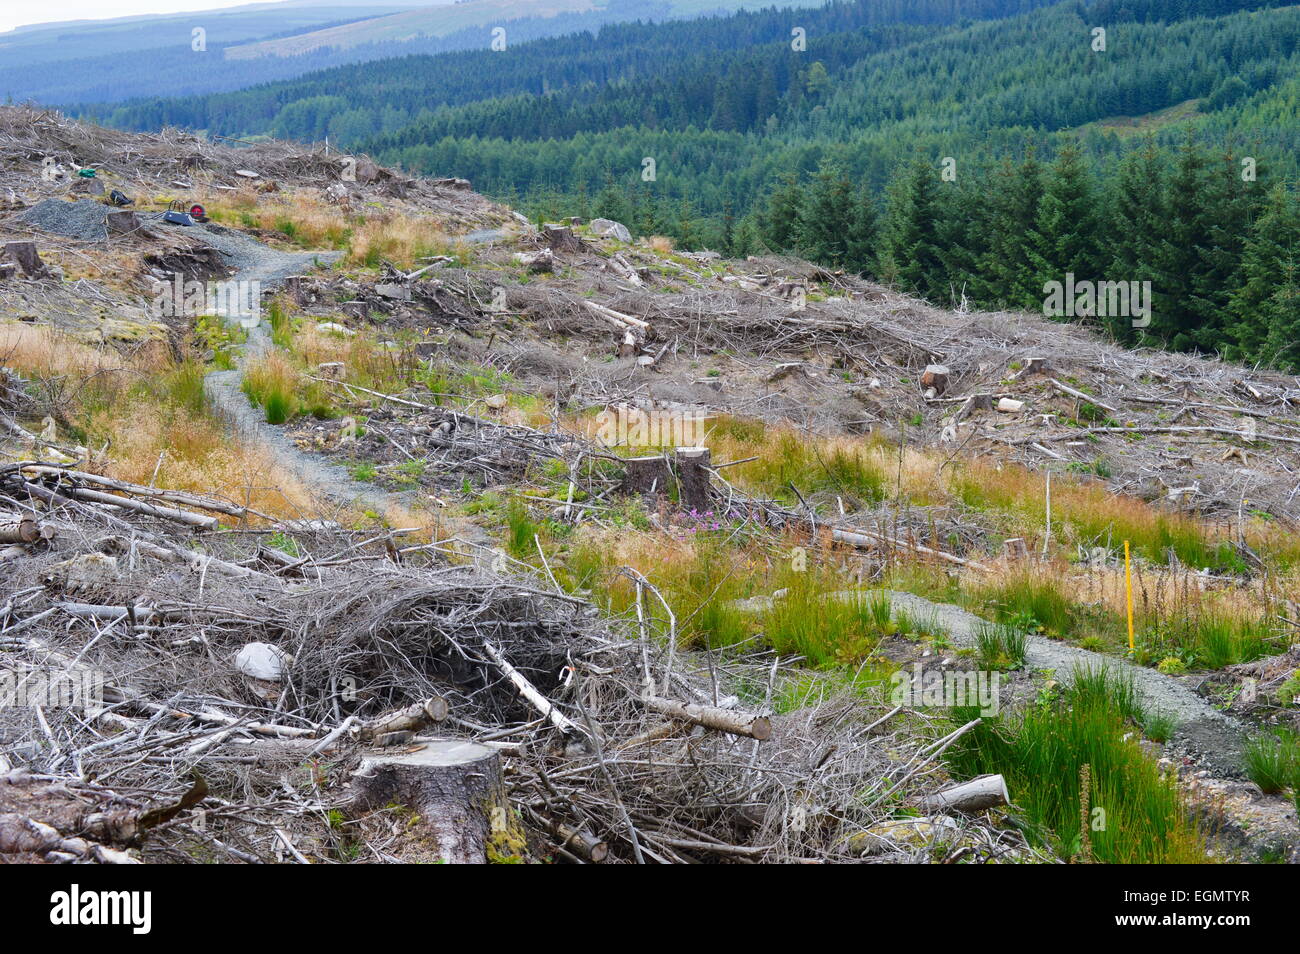 Newly built mountain bike trail on a recently clear felled site in Kielder, Northumberland. Stock Photo